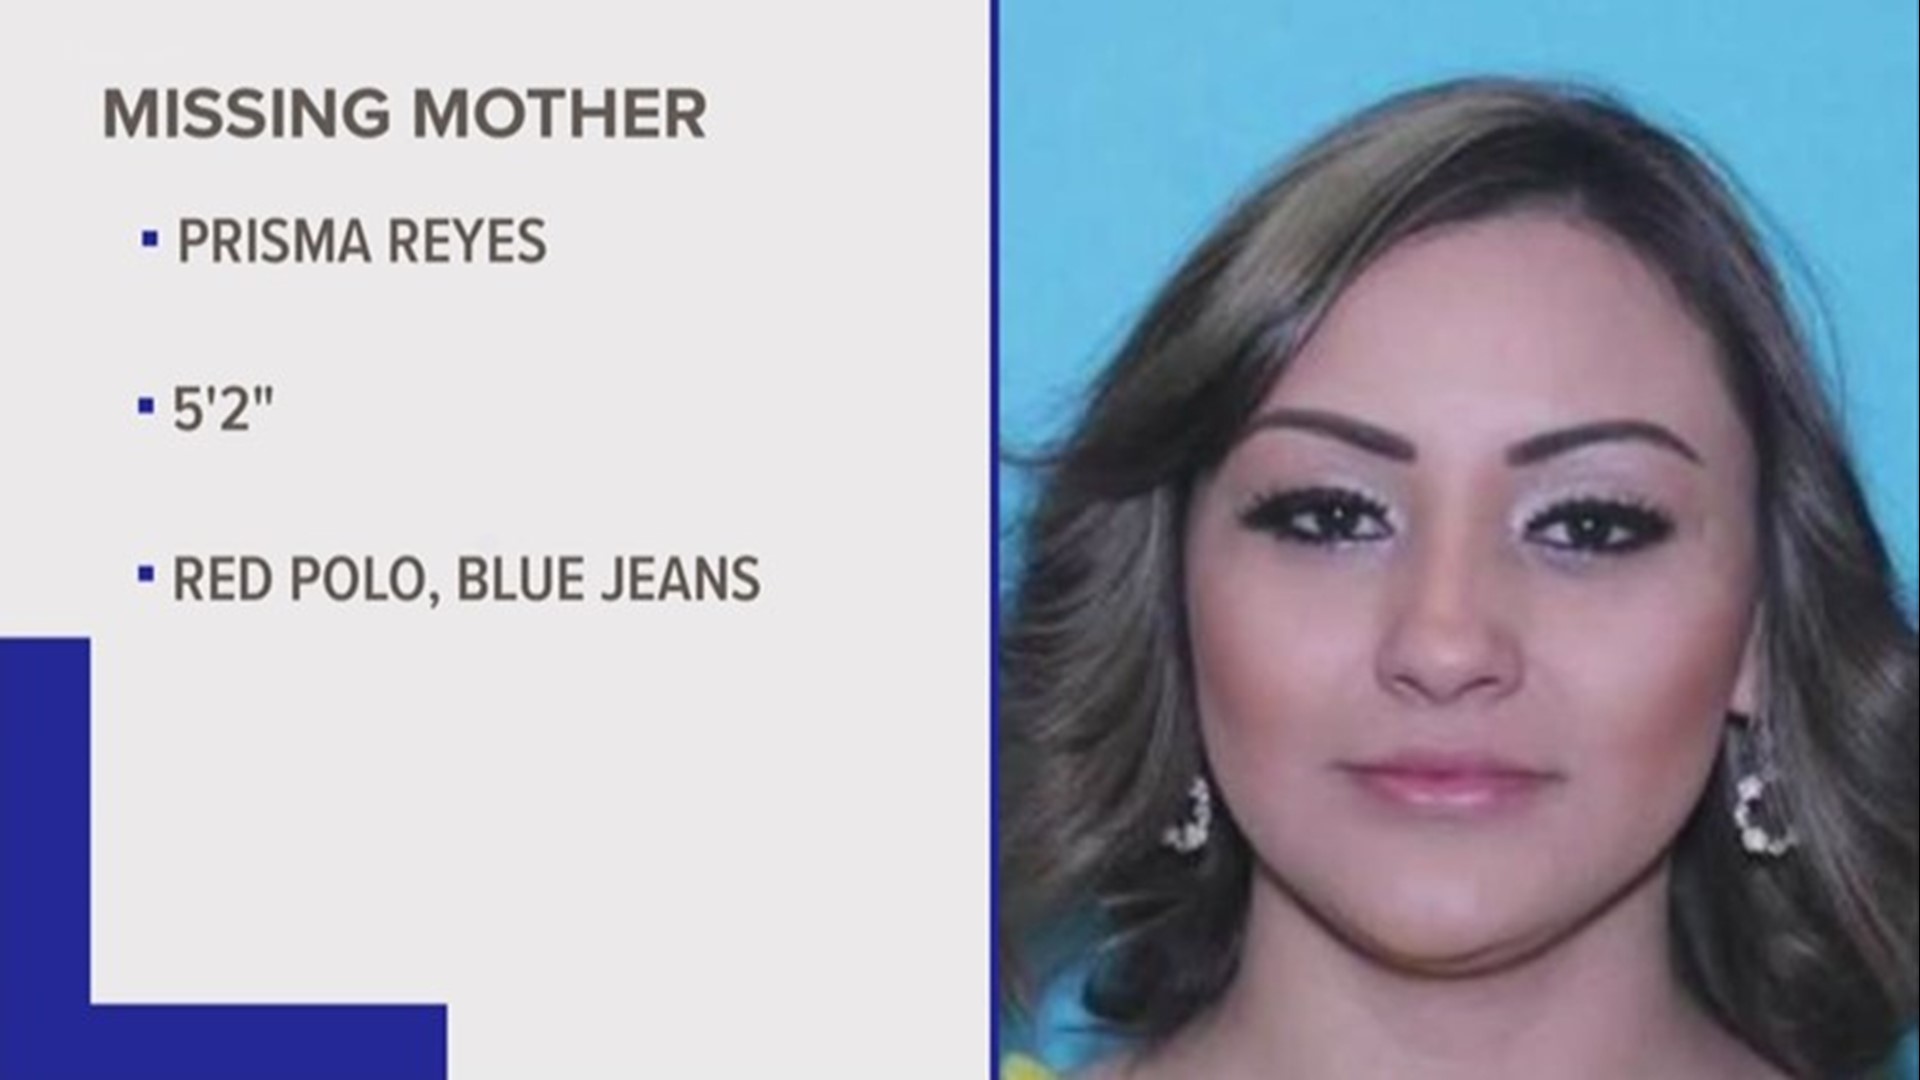 The search continues for Prisma Reyes, 26. She was last seen April 17 at a Dallas apartment complex.